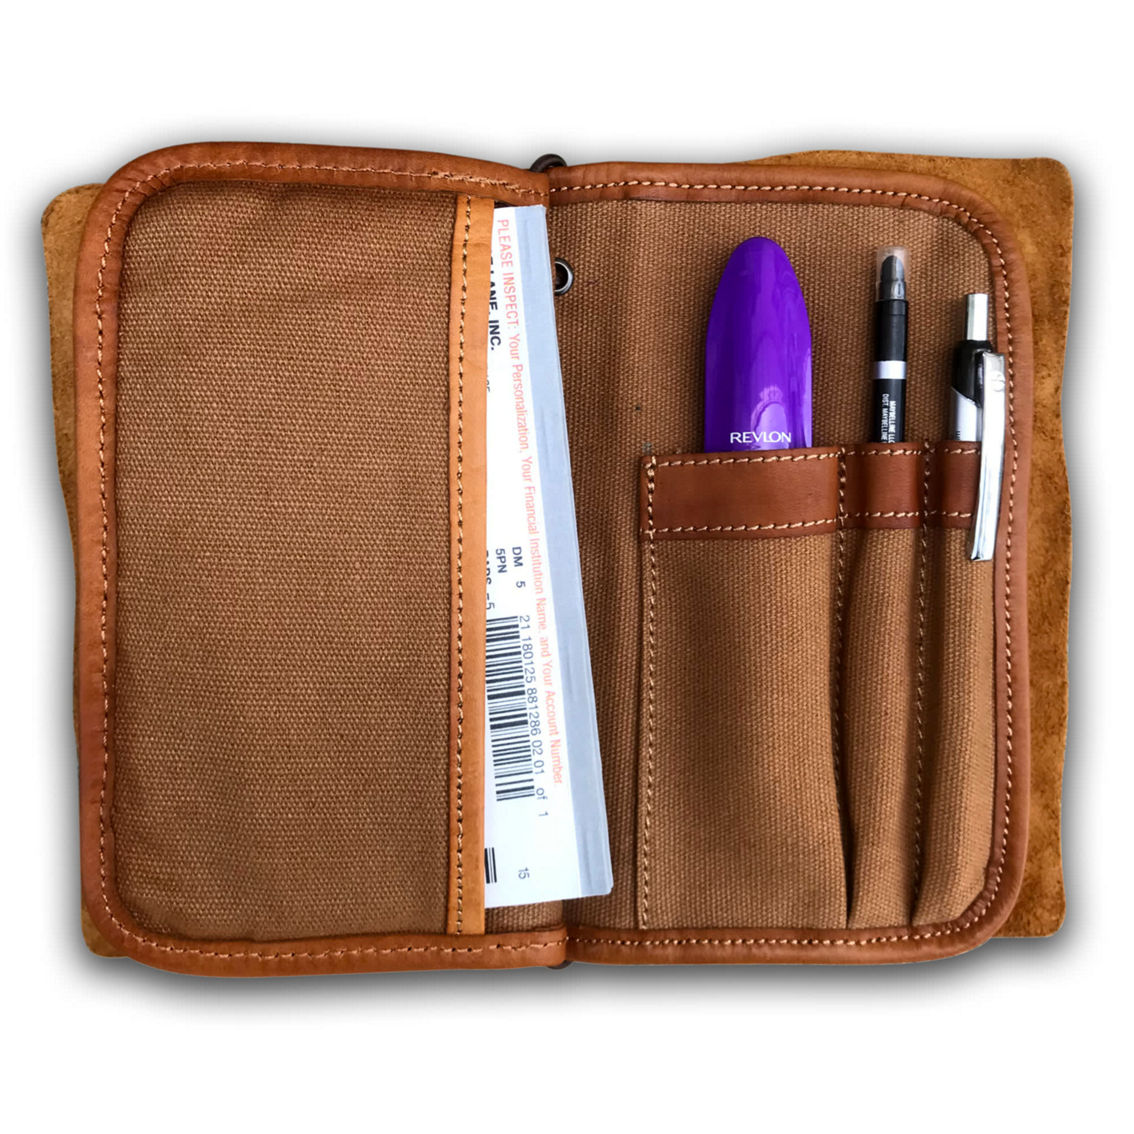 Old Trend Nomad Organizer Leather Wallet - Image 5 of 5